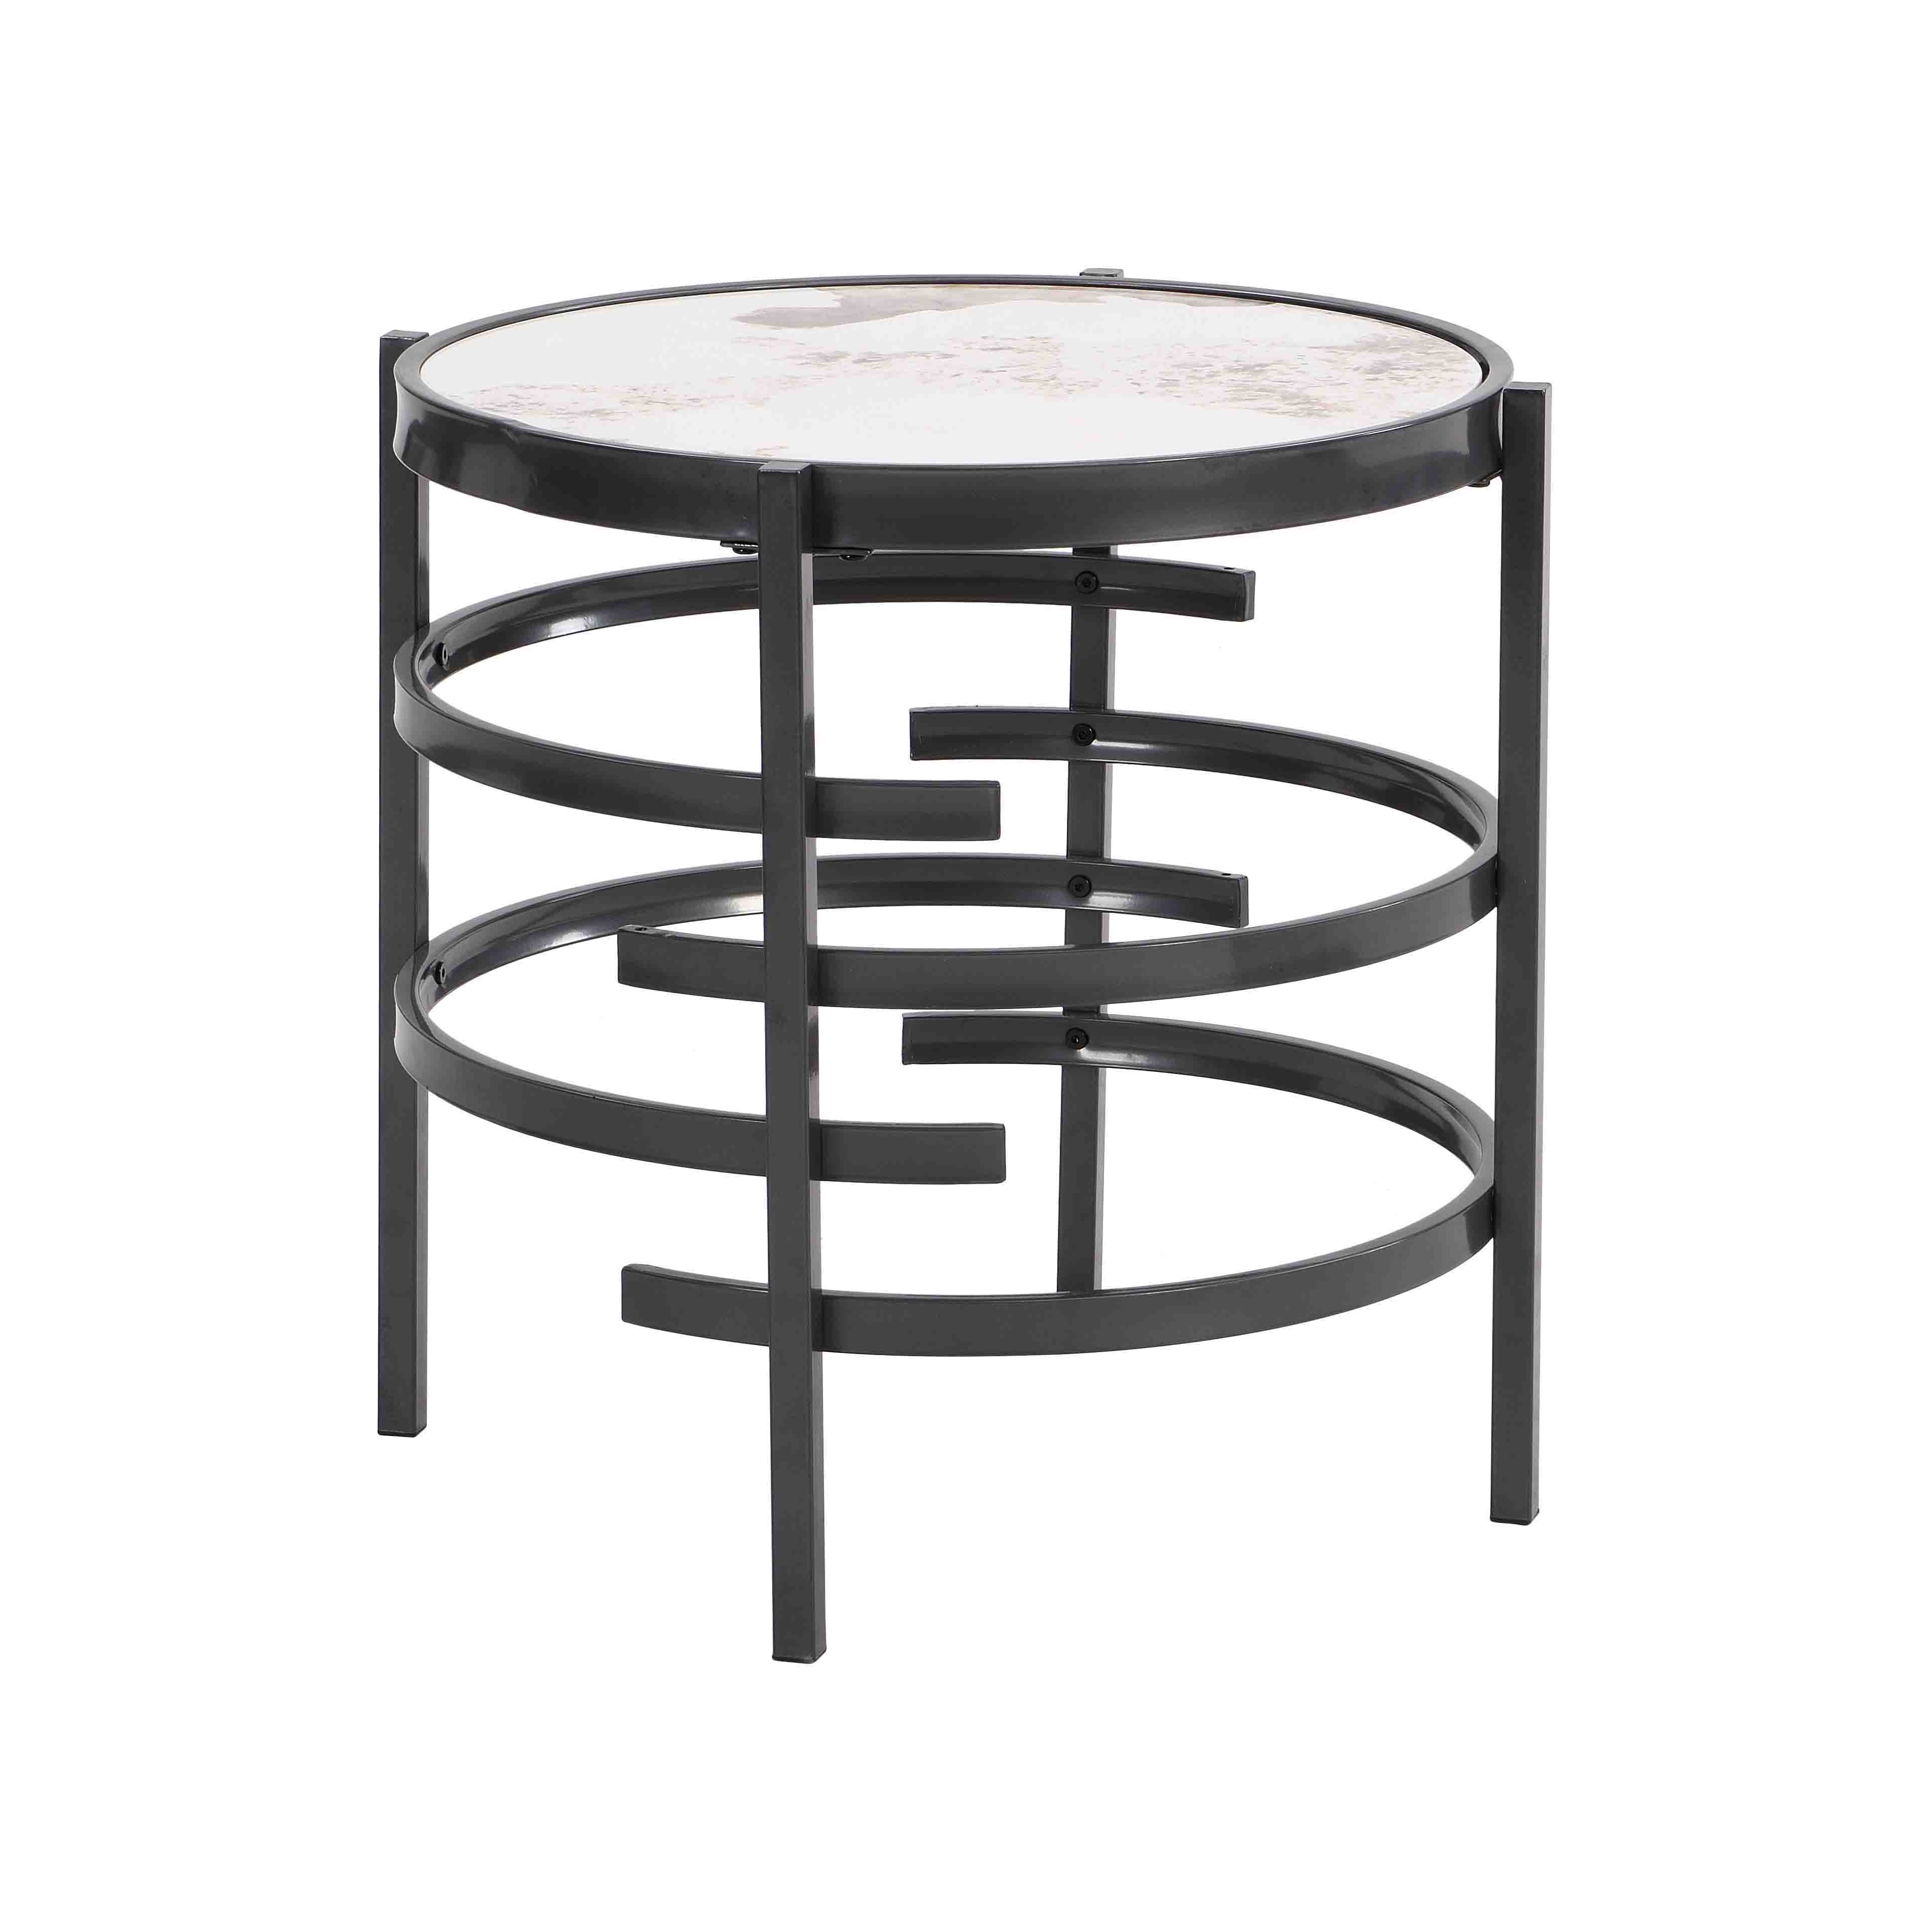 Elegant Pandora Sintered Stone End Table - Darker Gray Small Coffee Table For Living Room